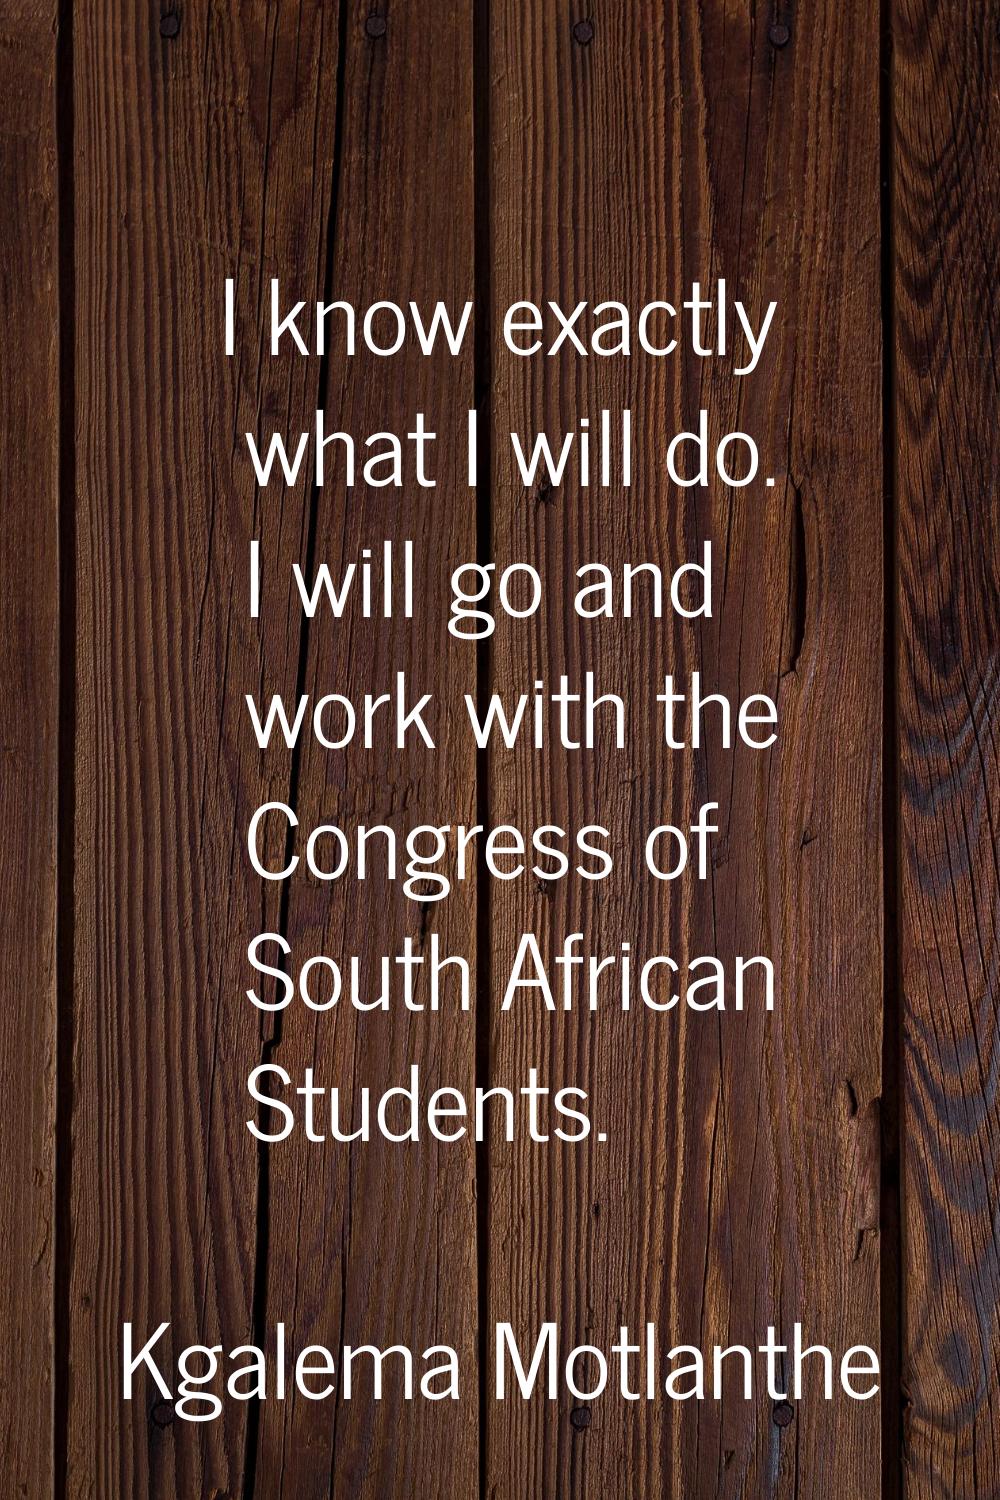 I know exactly what I will do. I will go and work with the Congress of South African Students.